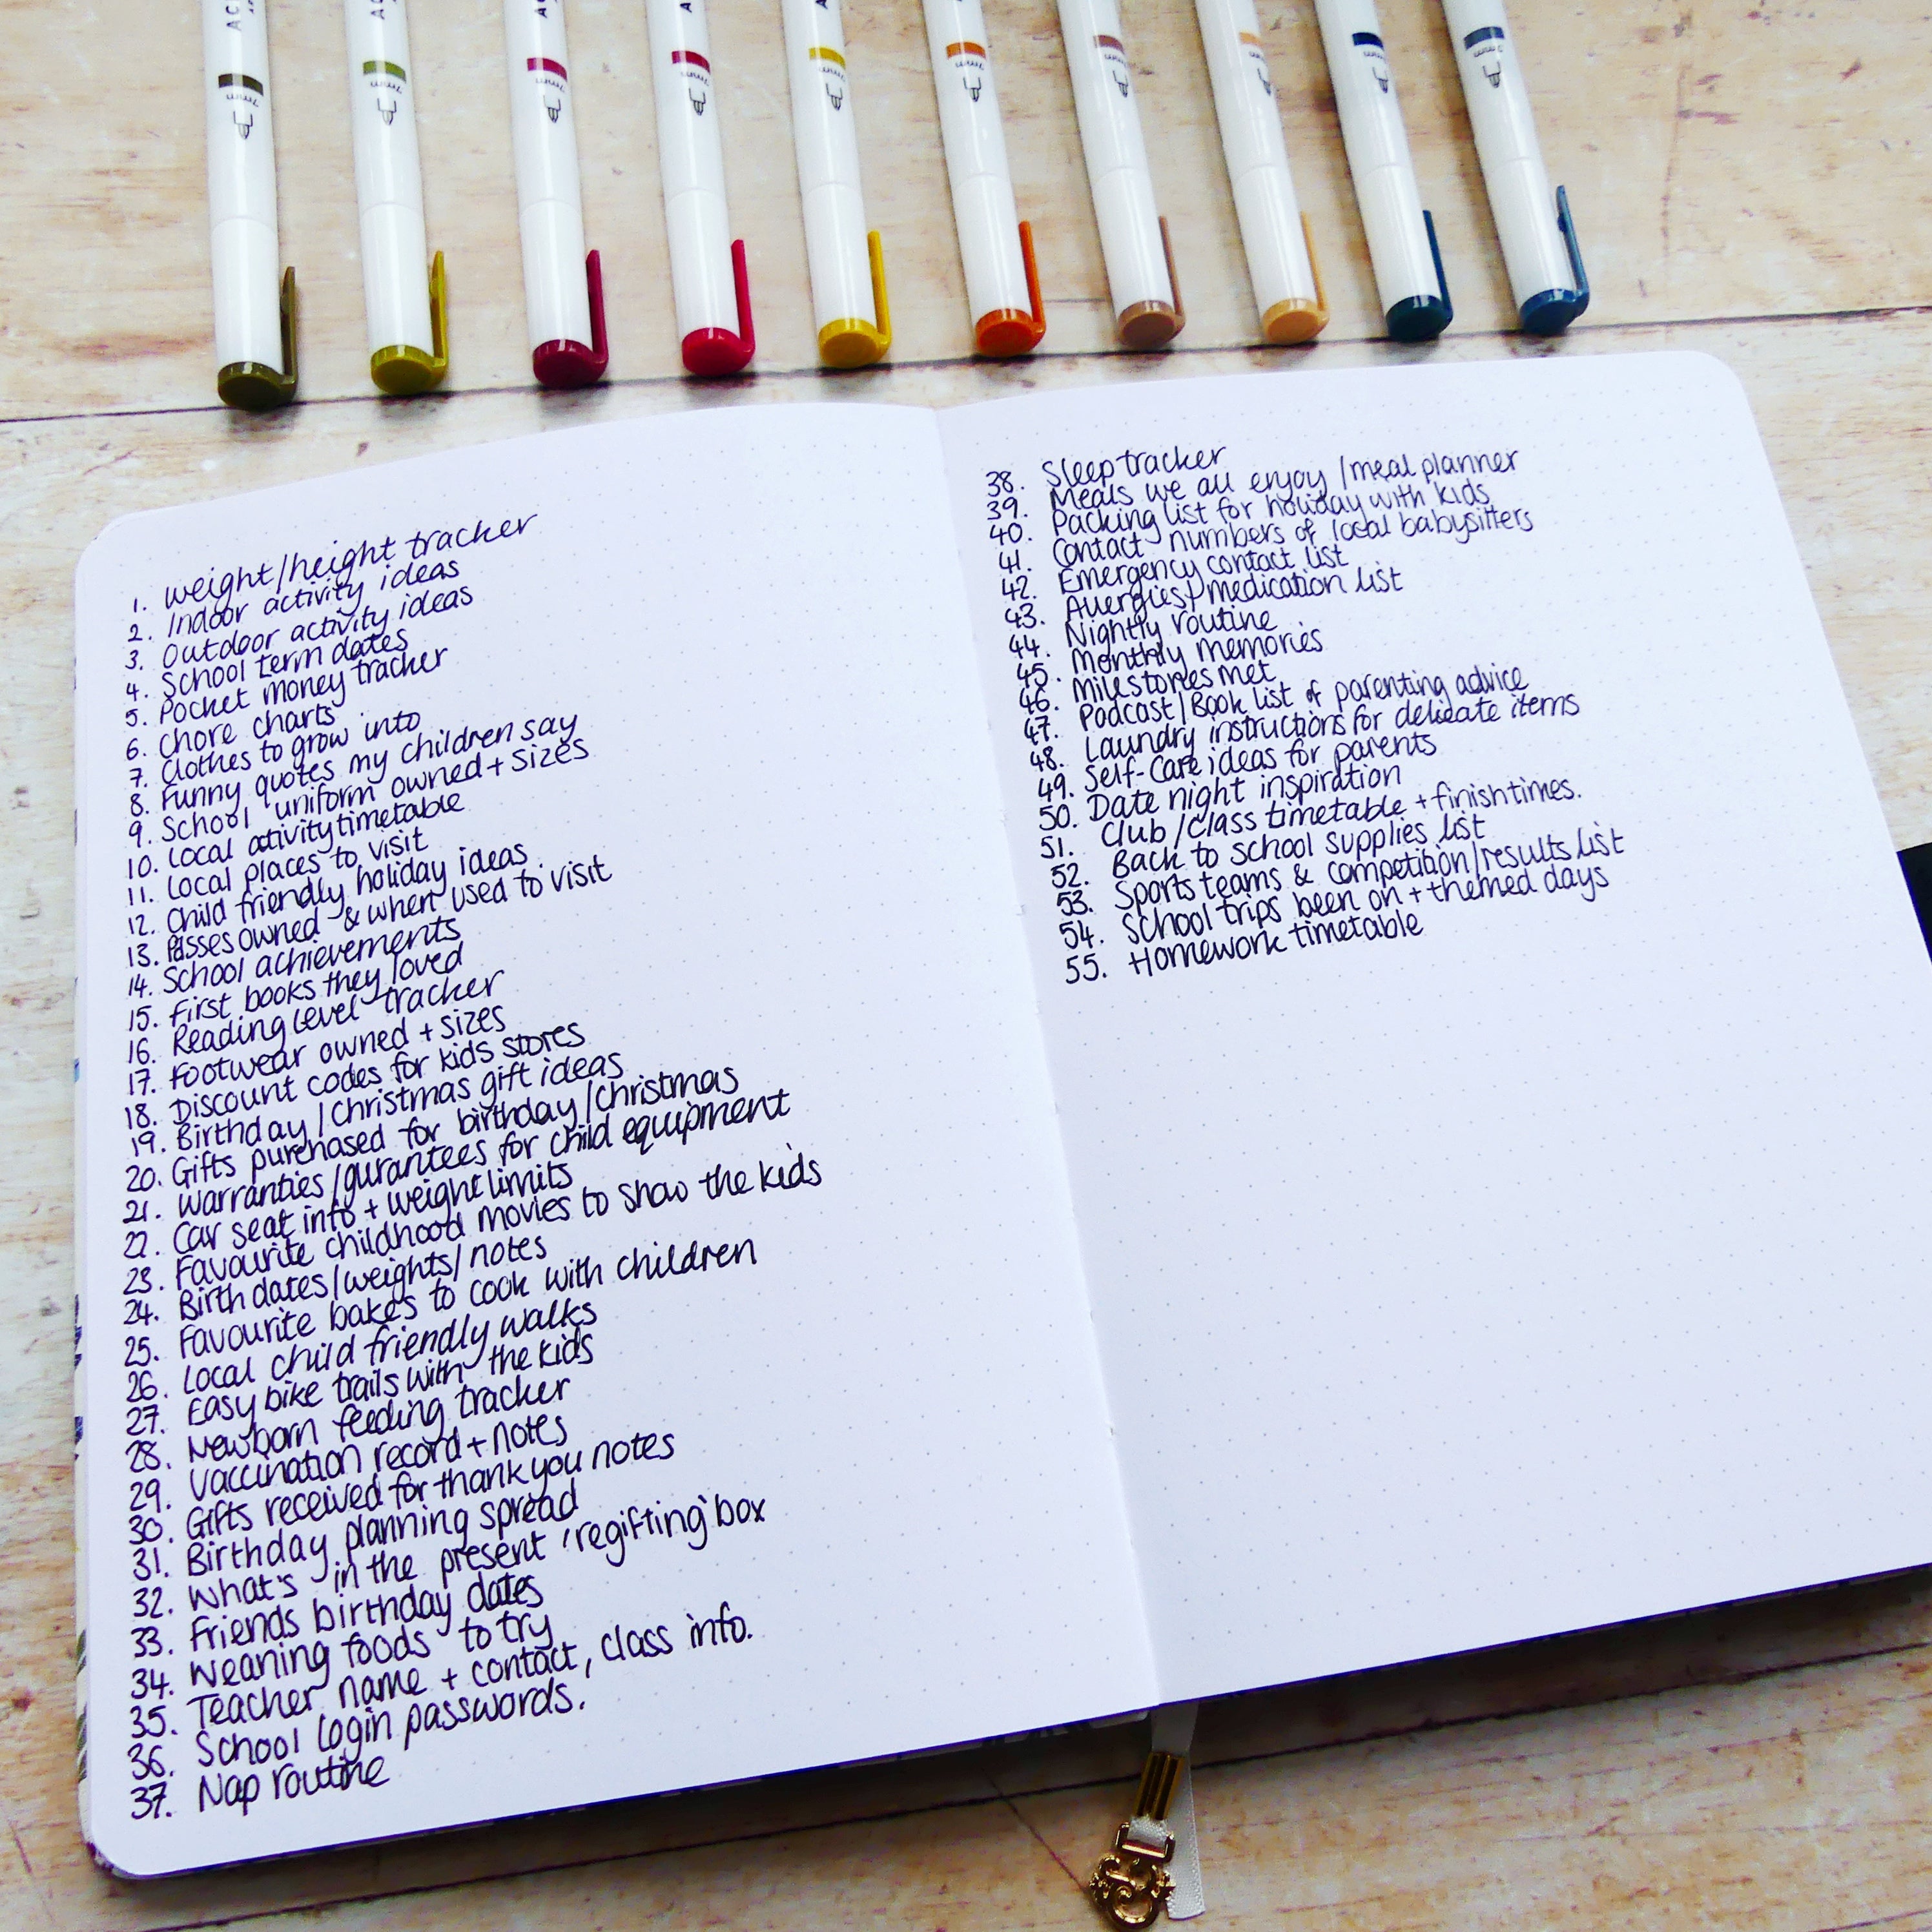 The Ultimate List of 15 Useful Bullet Journal Supplies